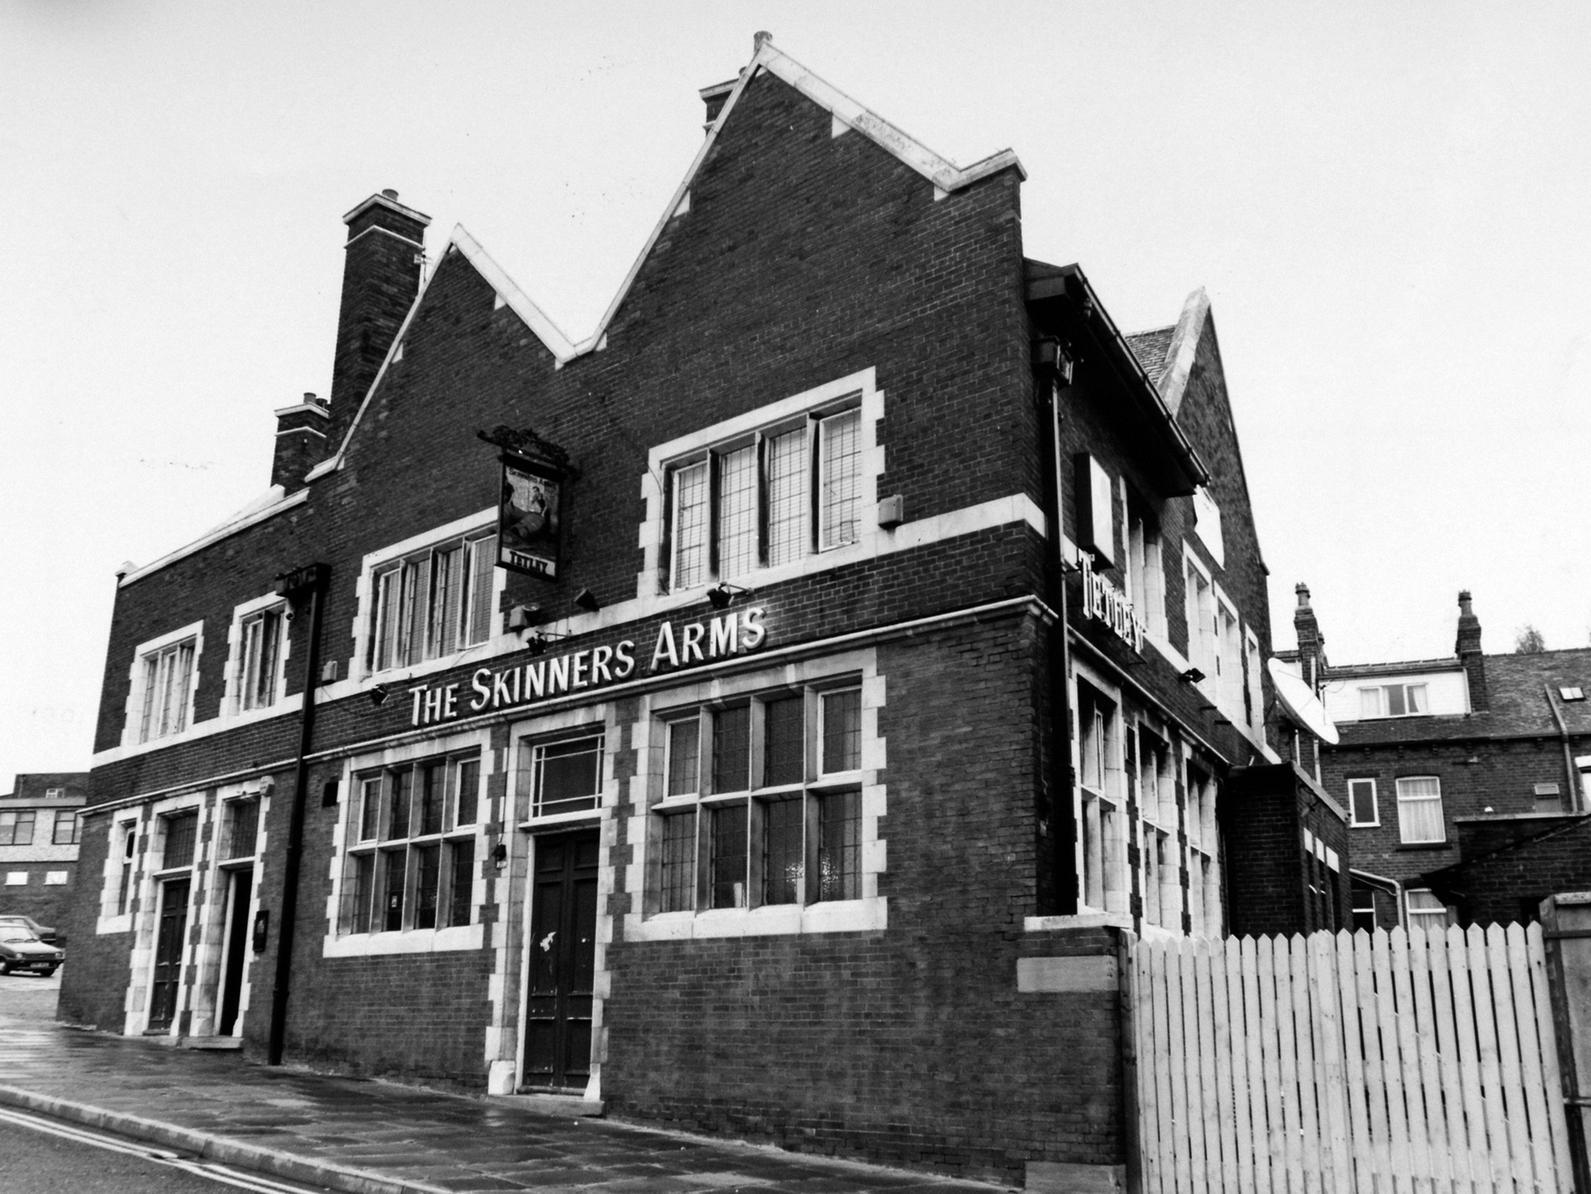 The Skinners Arms on Sheepscar Street North.